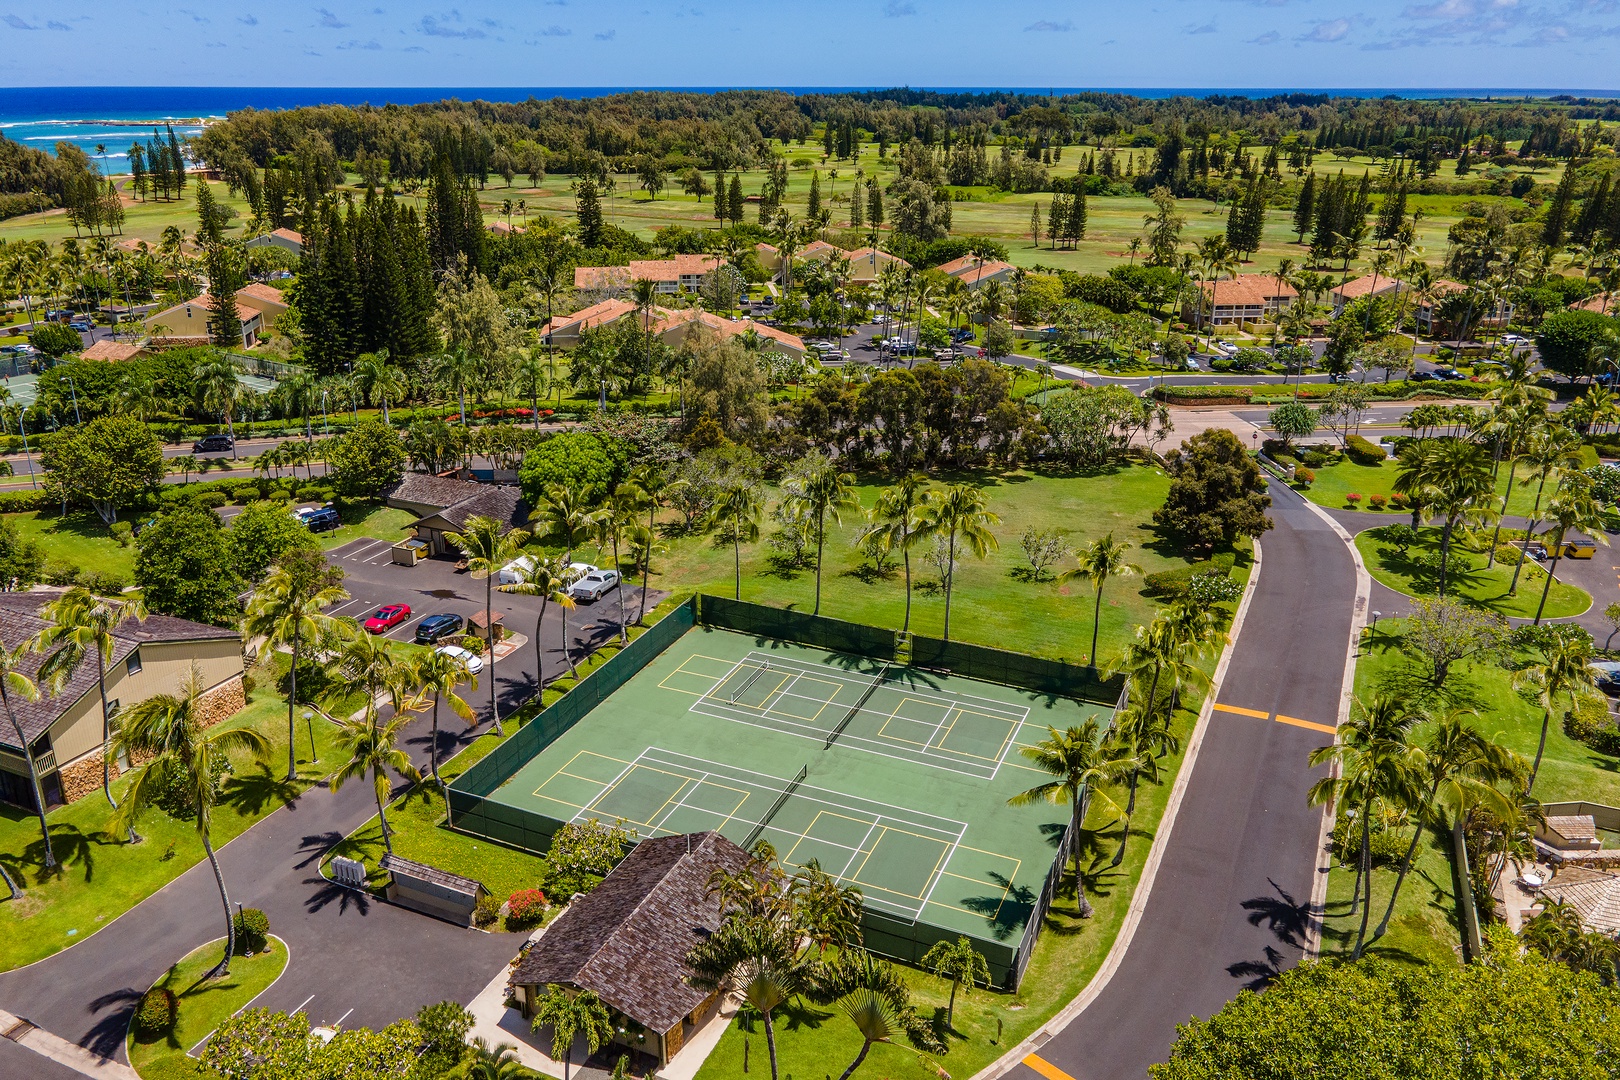 Kahuku Vacation Rentals, Kuilima Estates West #85 - Kuilima Estates Tennis and Pickle Ball Courts.